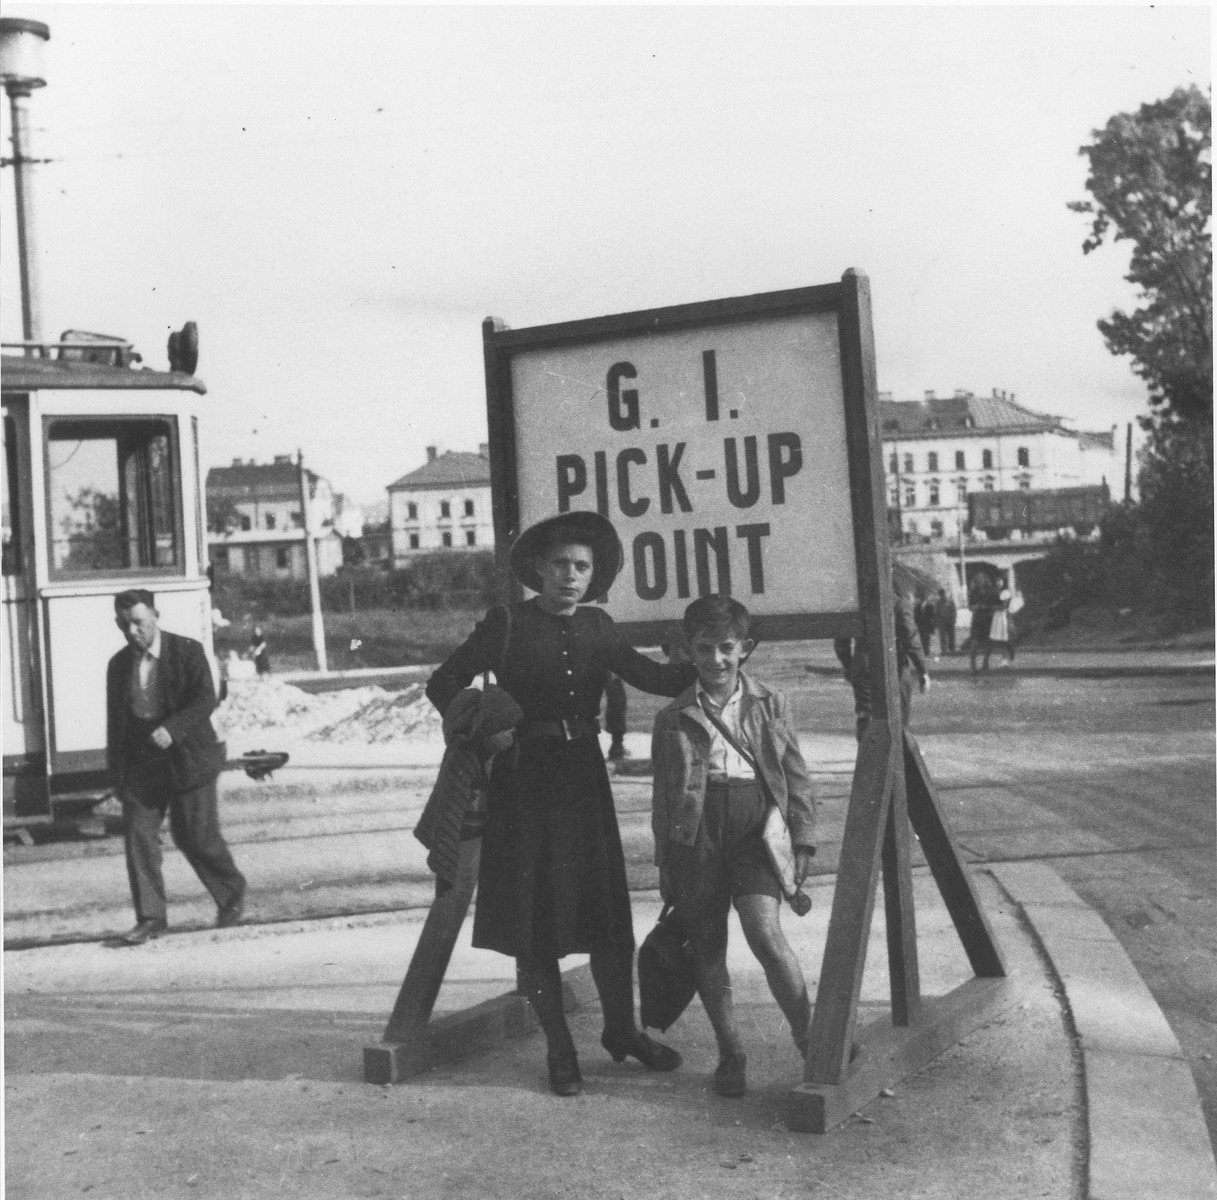 Friederike and Wolfgang Schaechter at a tram stop near the Enns displaced persons camp.

The location of the photogarph may be Linz, Austria, around 16 miles form Enns.